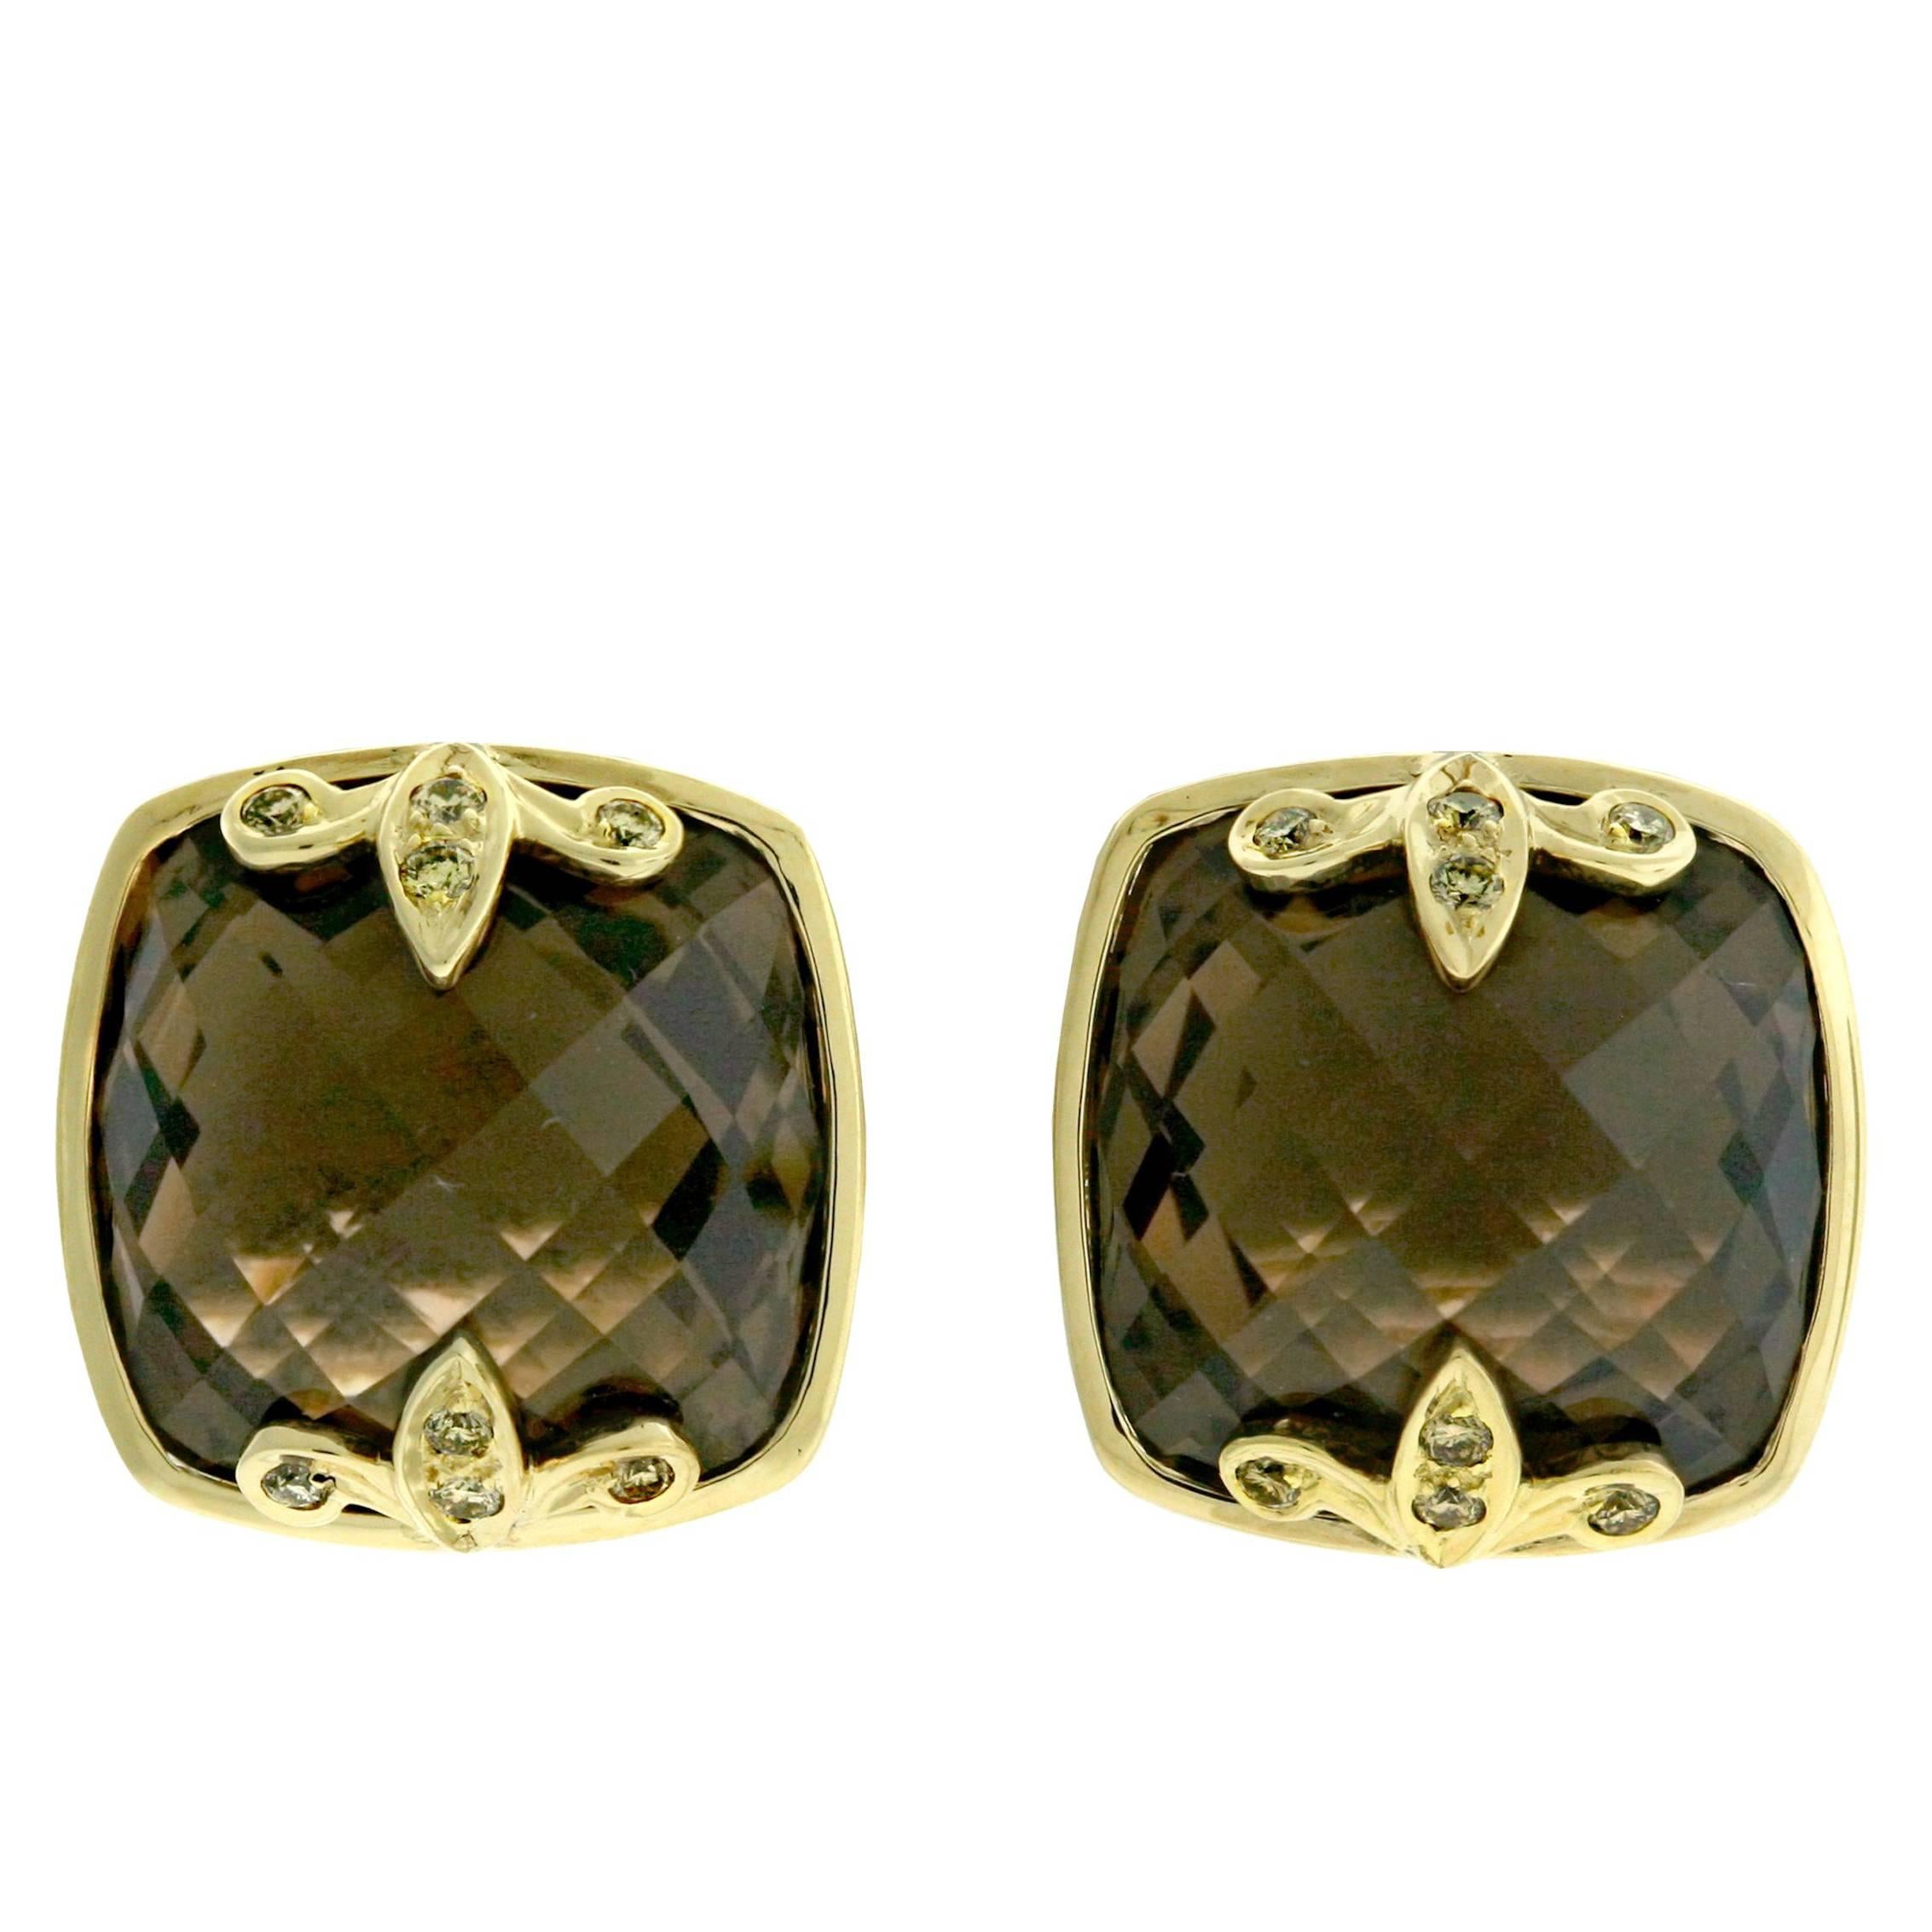 Crevoshay One of a Kind Boulder Brown Diamond and Smokey Quartz Earrings. For Sale